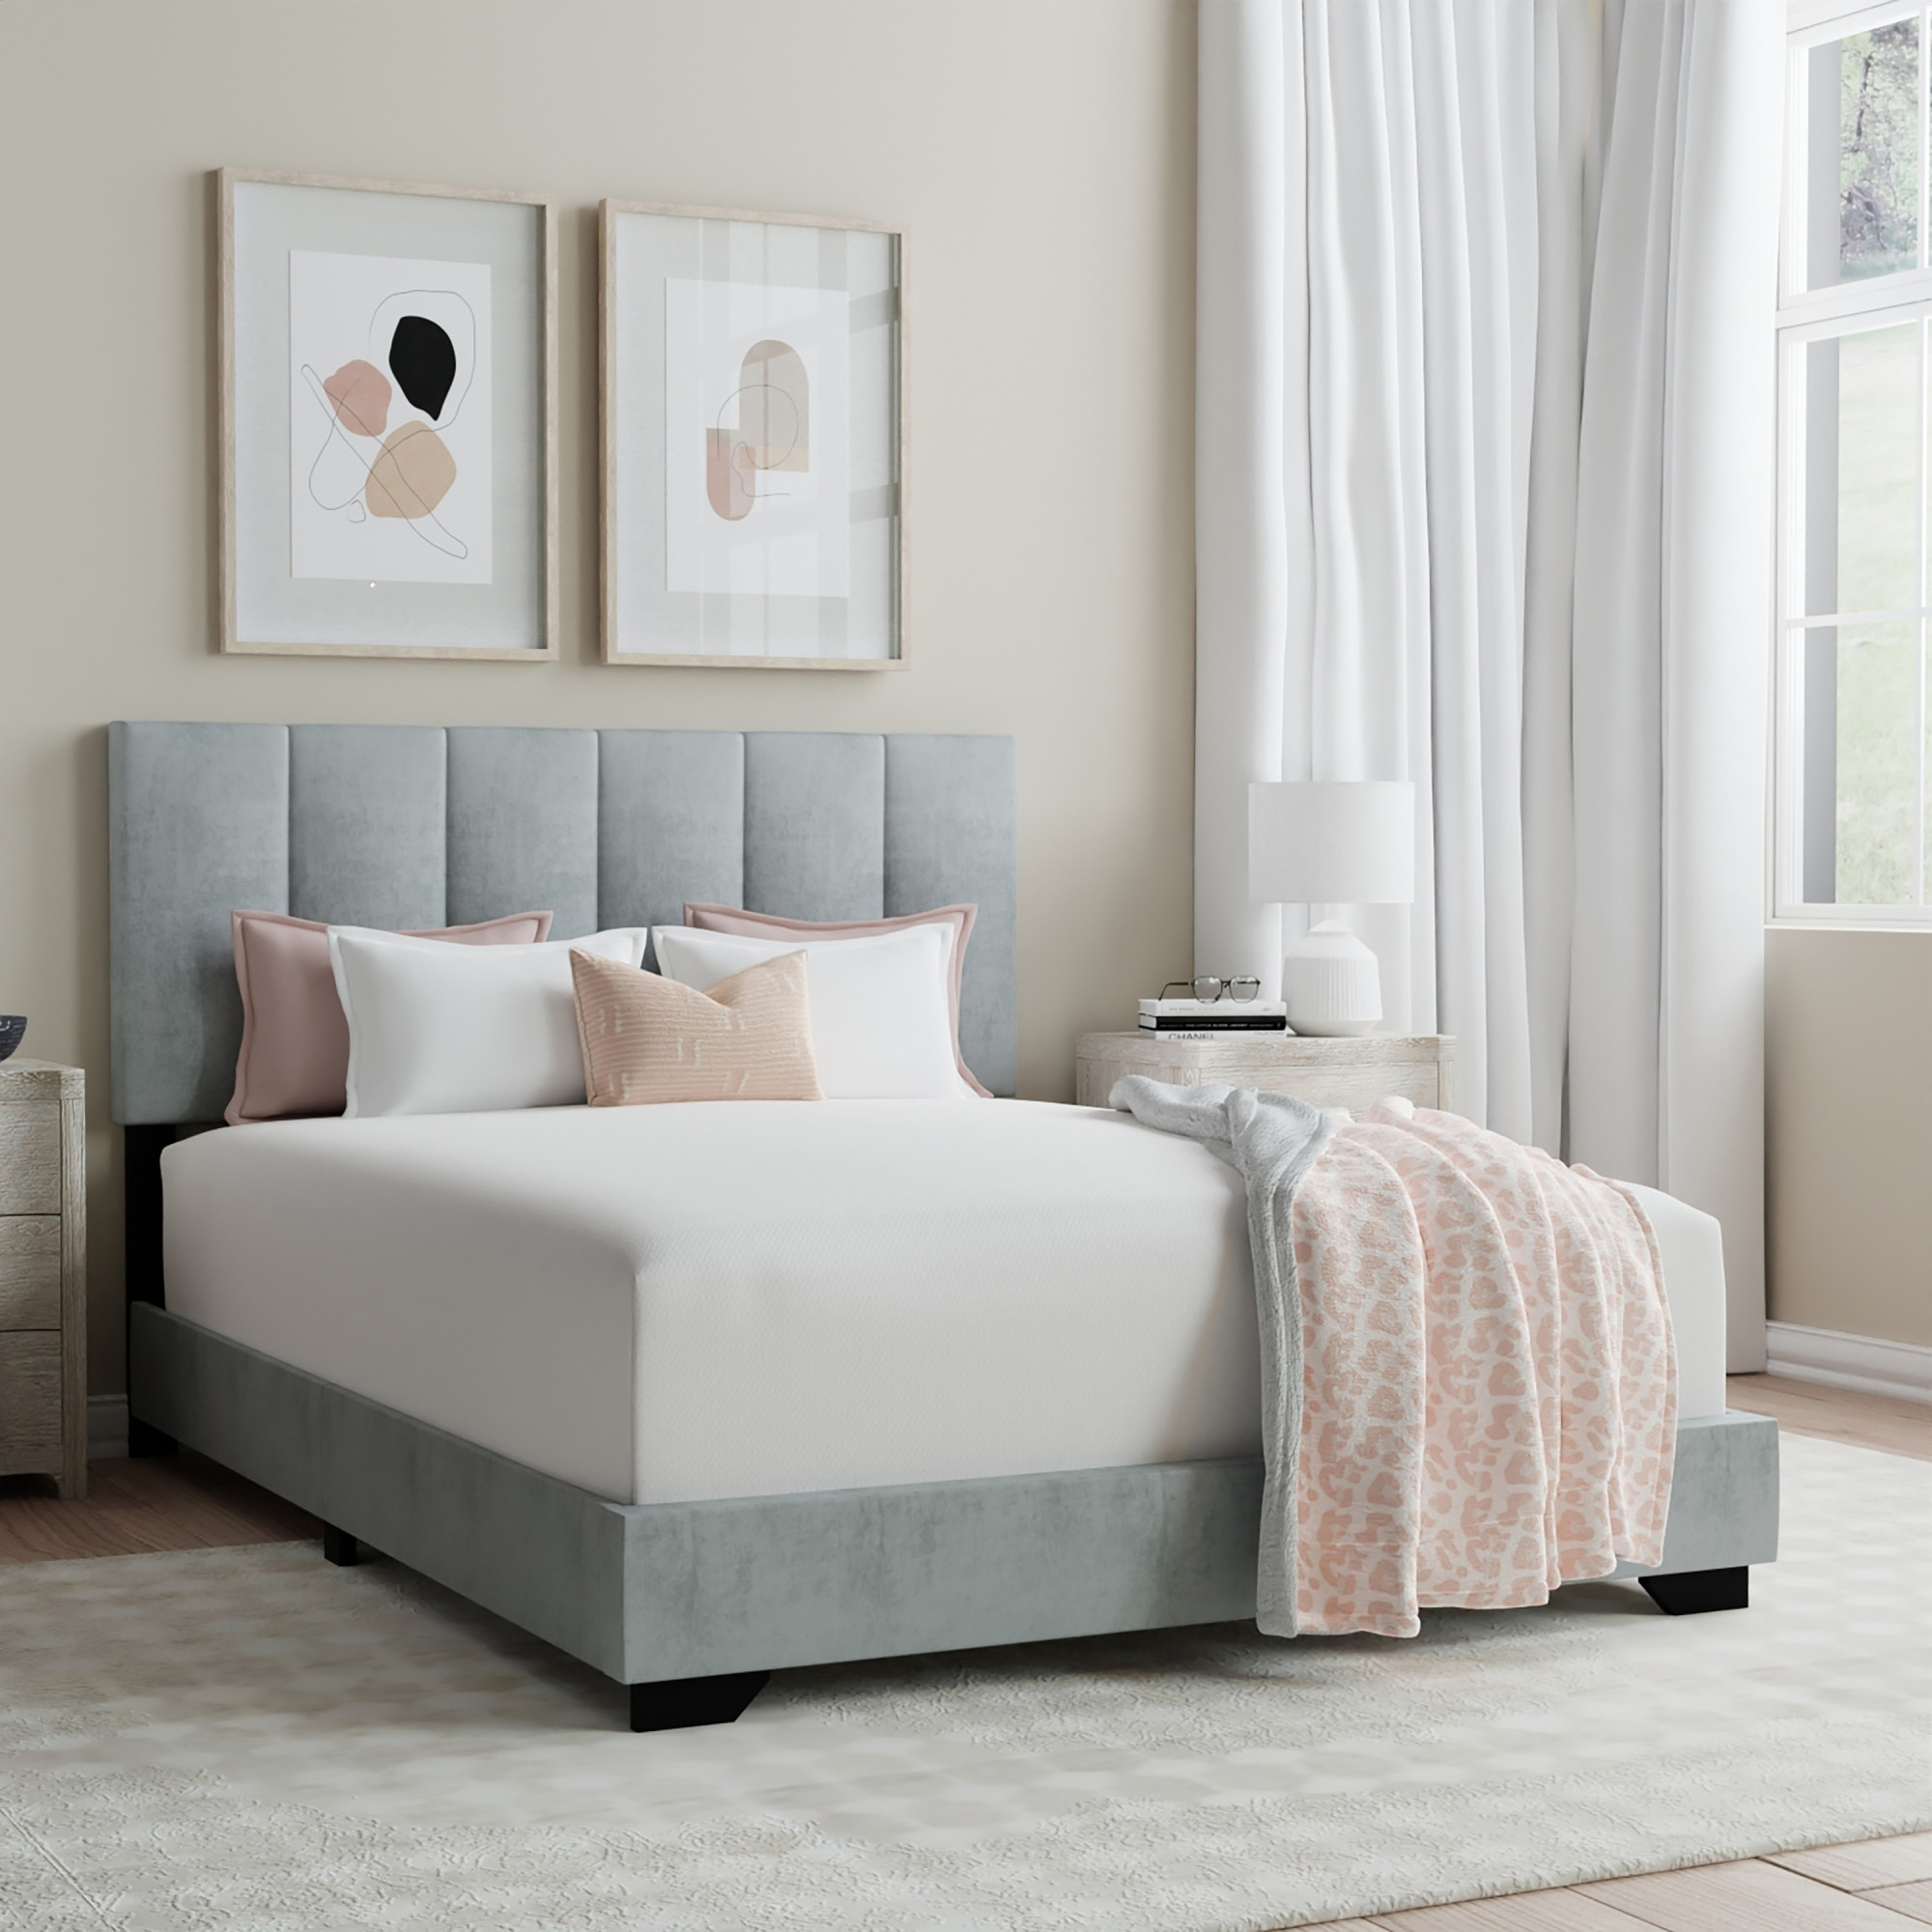 Reece Channel Stitched Upholstered Full Bed, Platinum Grey, by Hillsdale Living Essentials - image 1 of 17